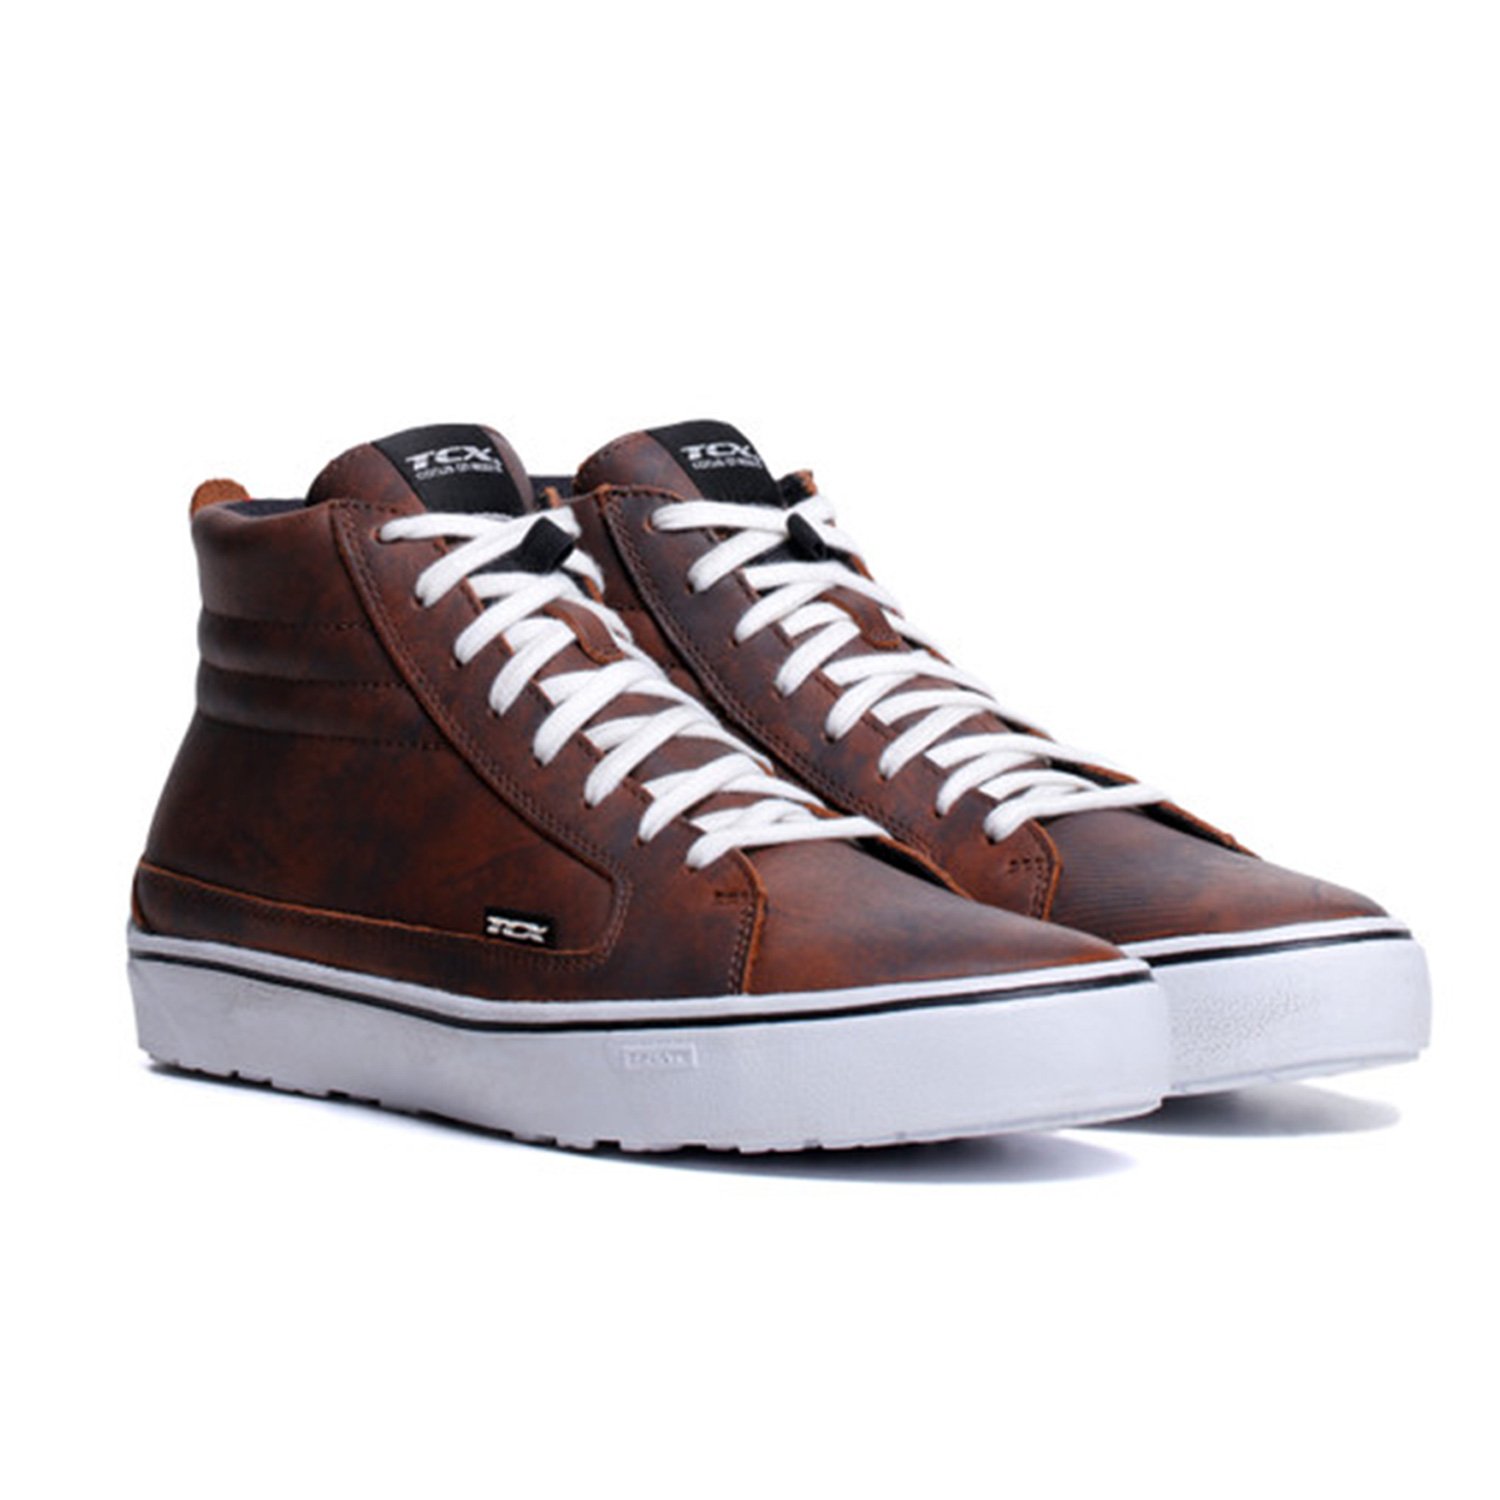 Image of TCX Street 3 WP Brown White Size 45 ID 8051019547880